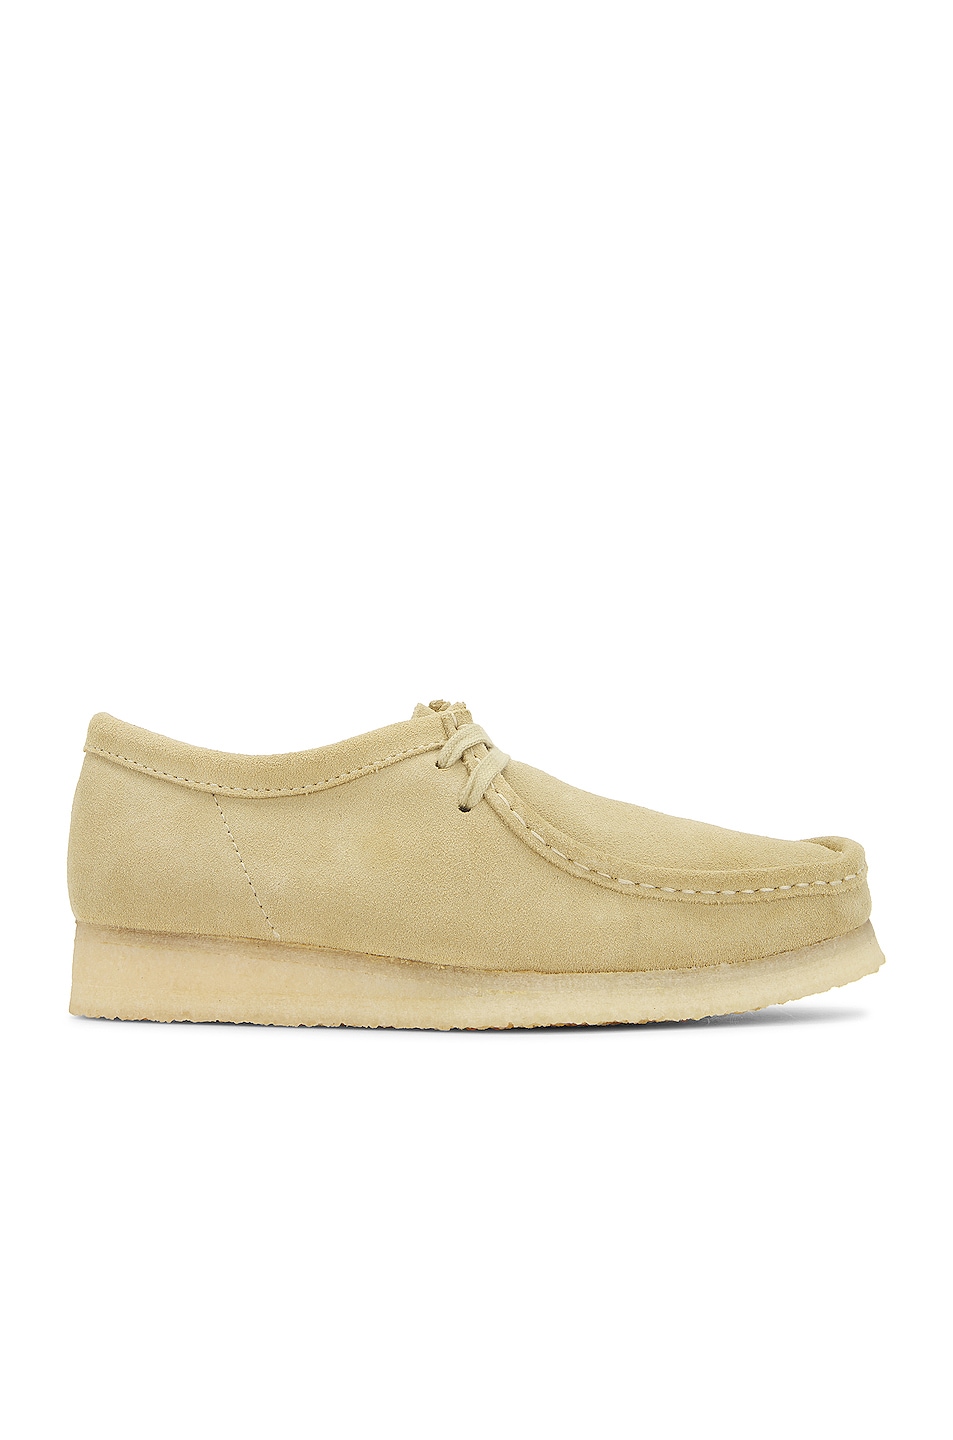 Image 1 of Clarks Wallabee in Maple Suede